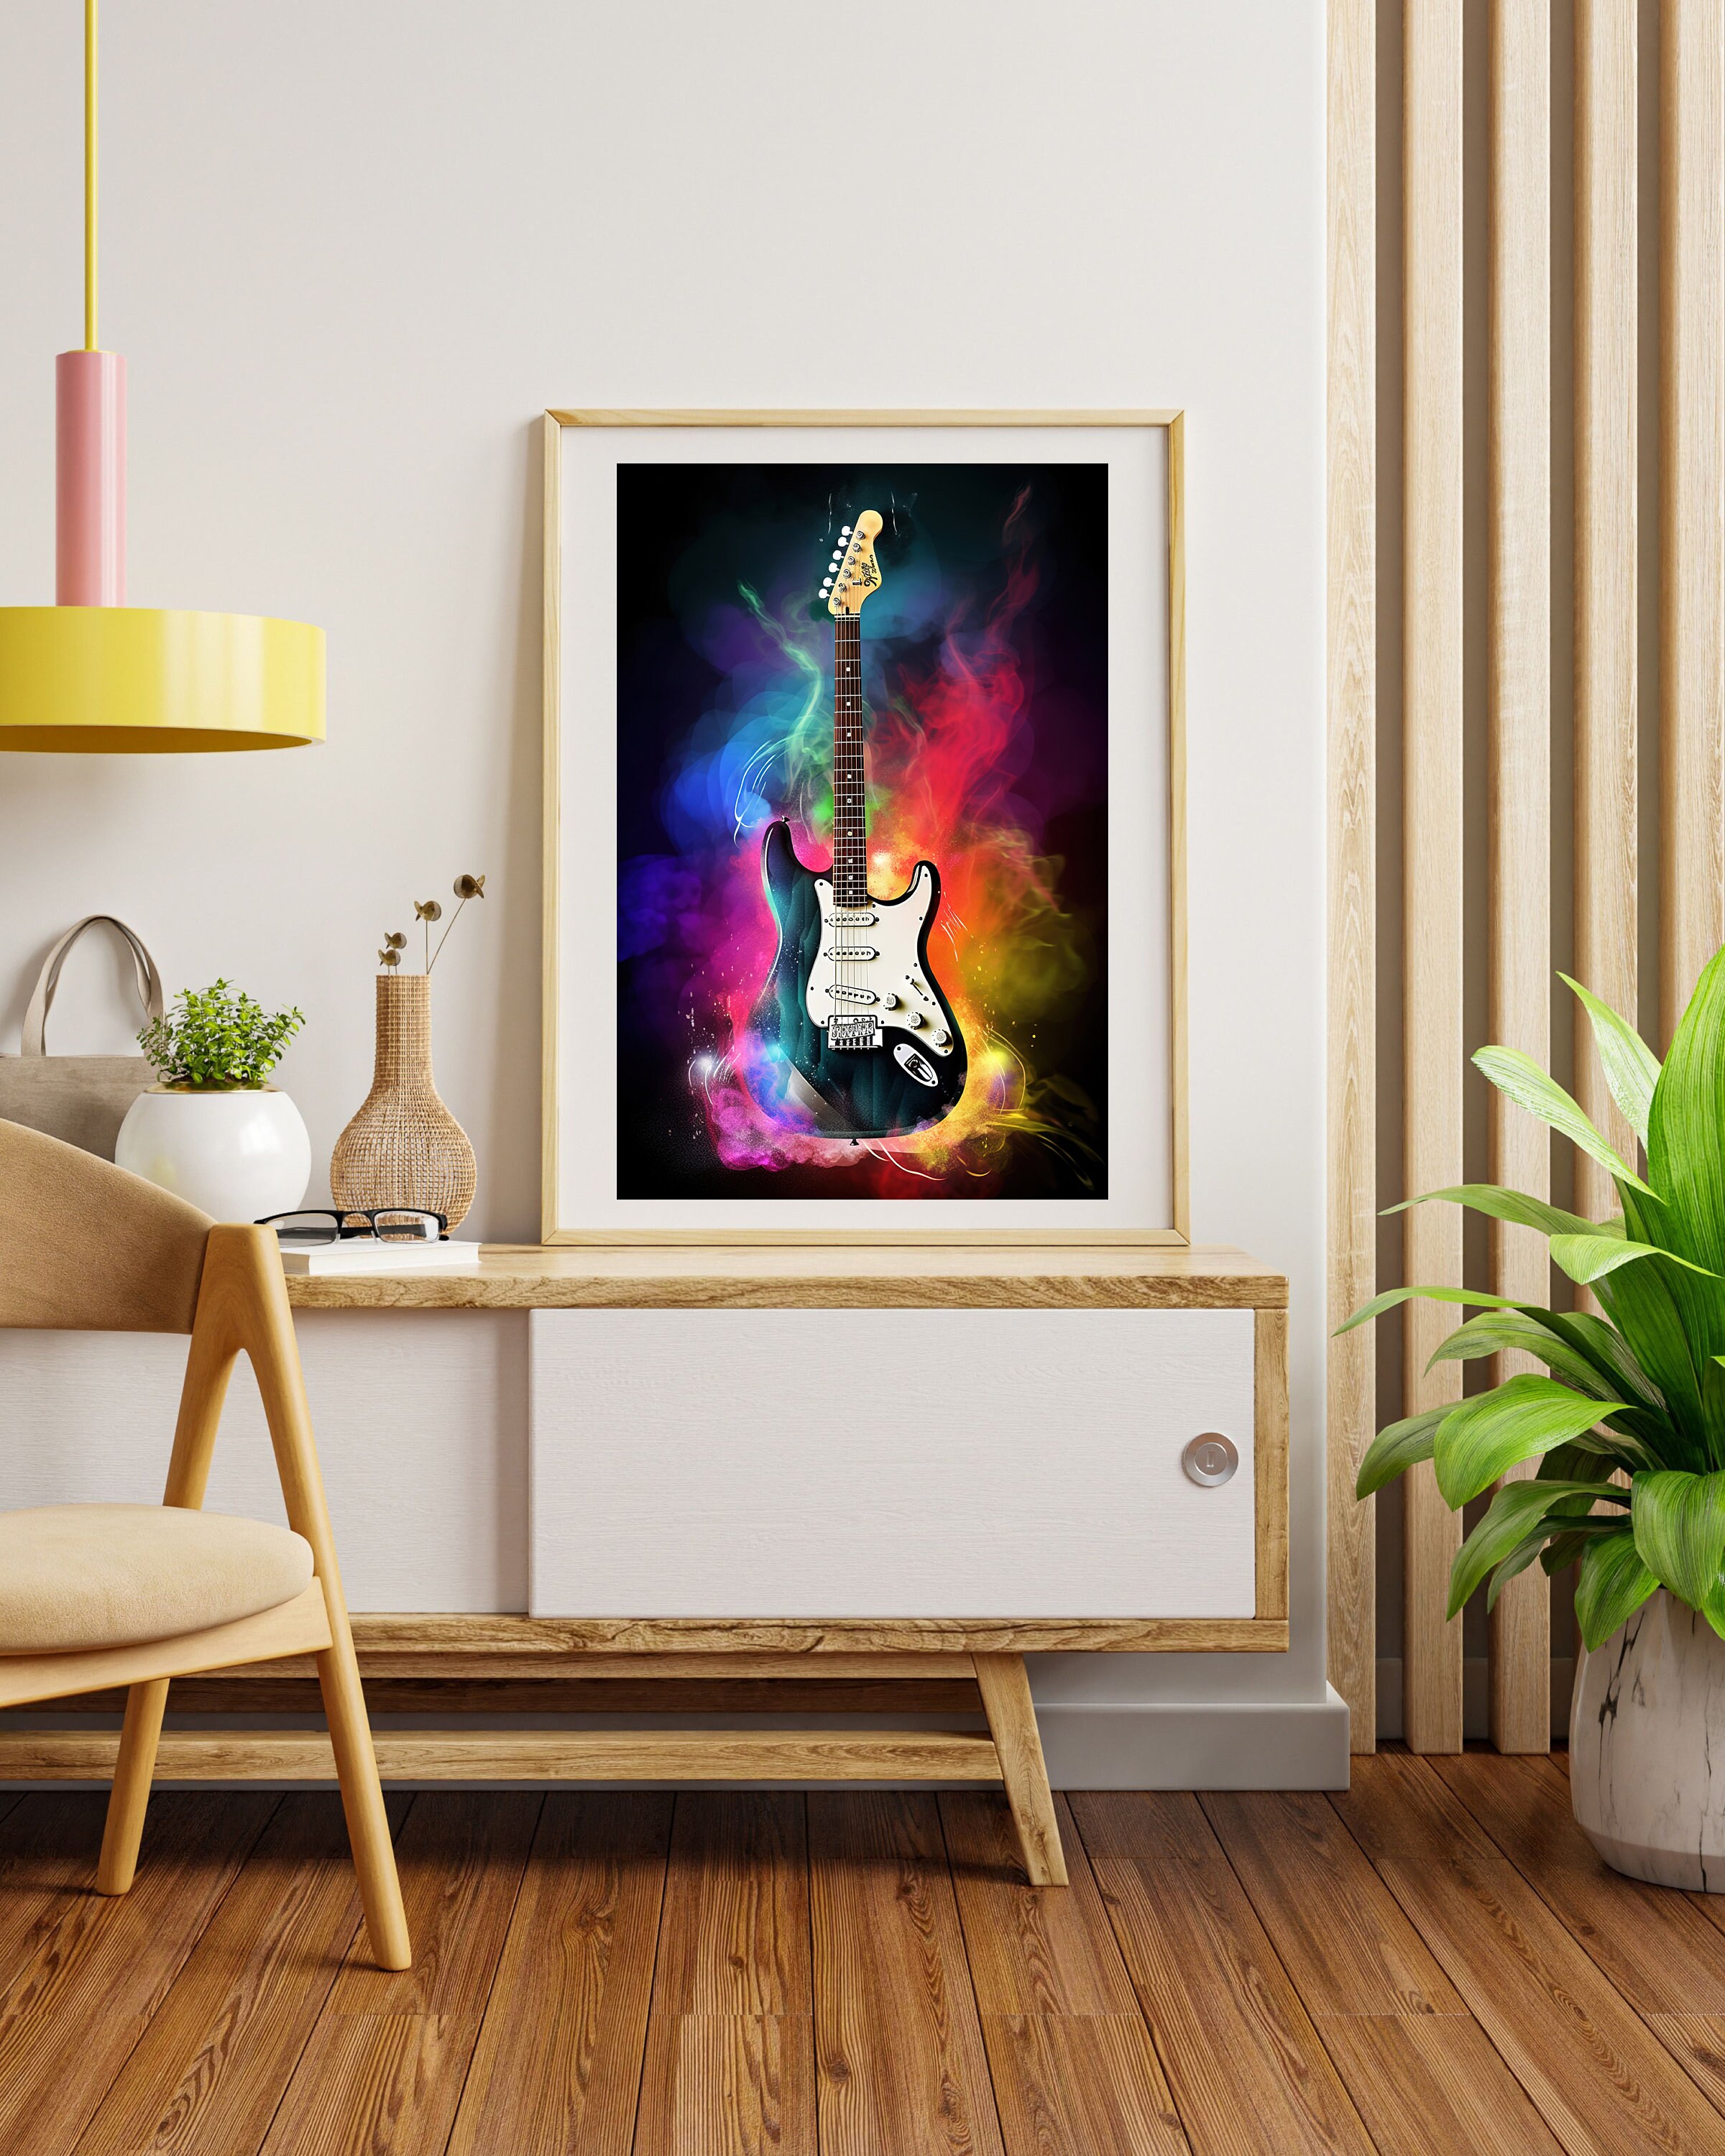 Abstract Electric Guitar Poster Art, Musical Instrument Wall Decor ...